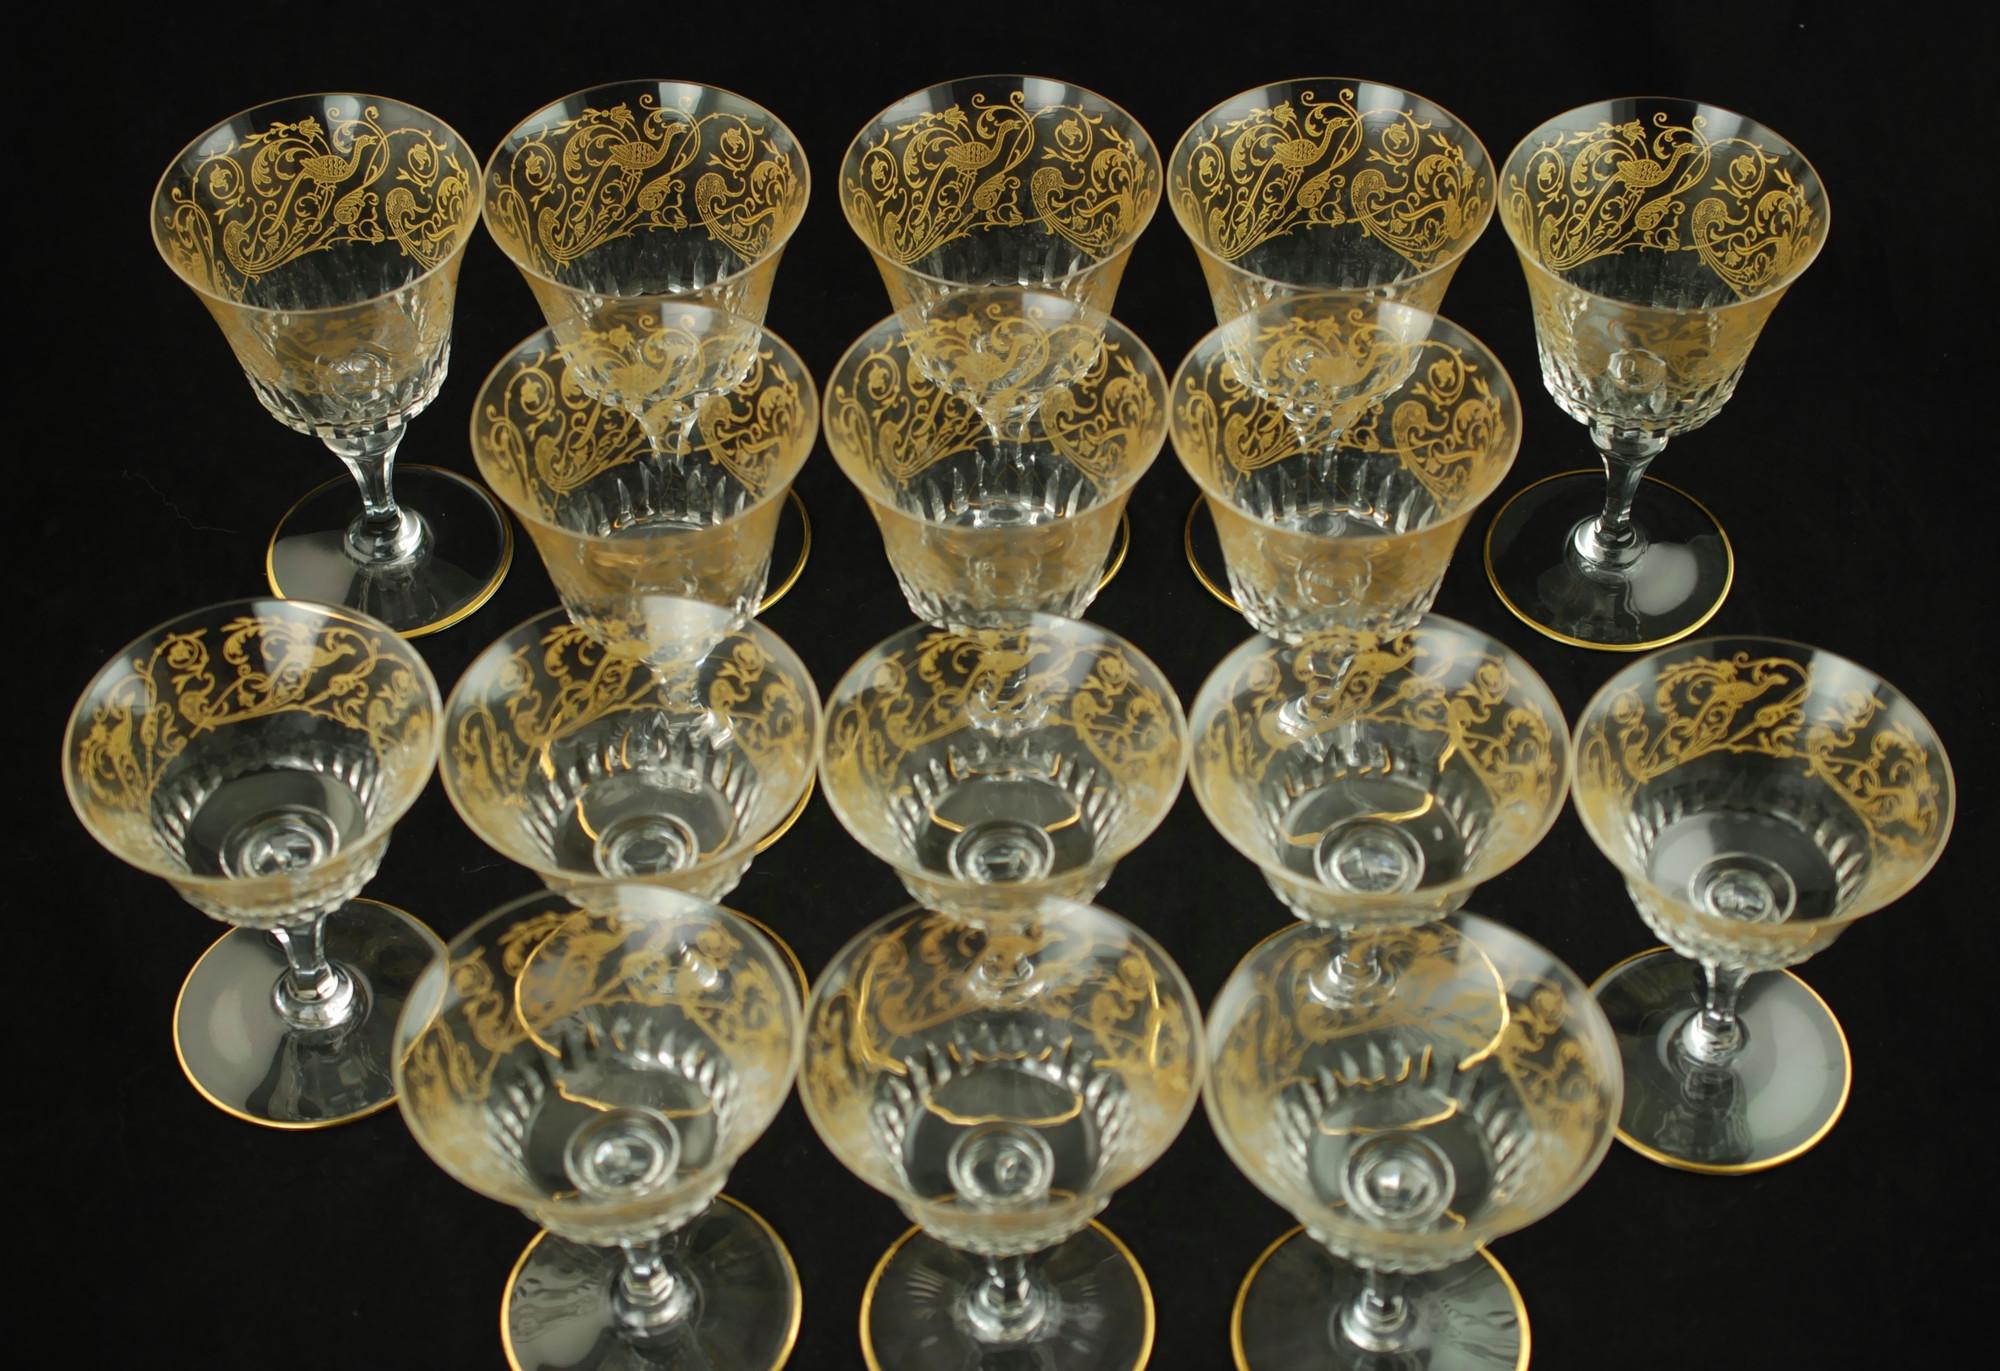 Baccarat Bergame Parme Gilt Etched Crystal Glasses with Paneled Stems Set of 16 For Sale 9